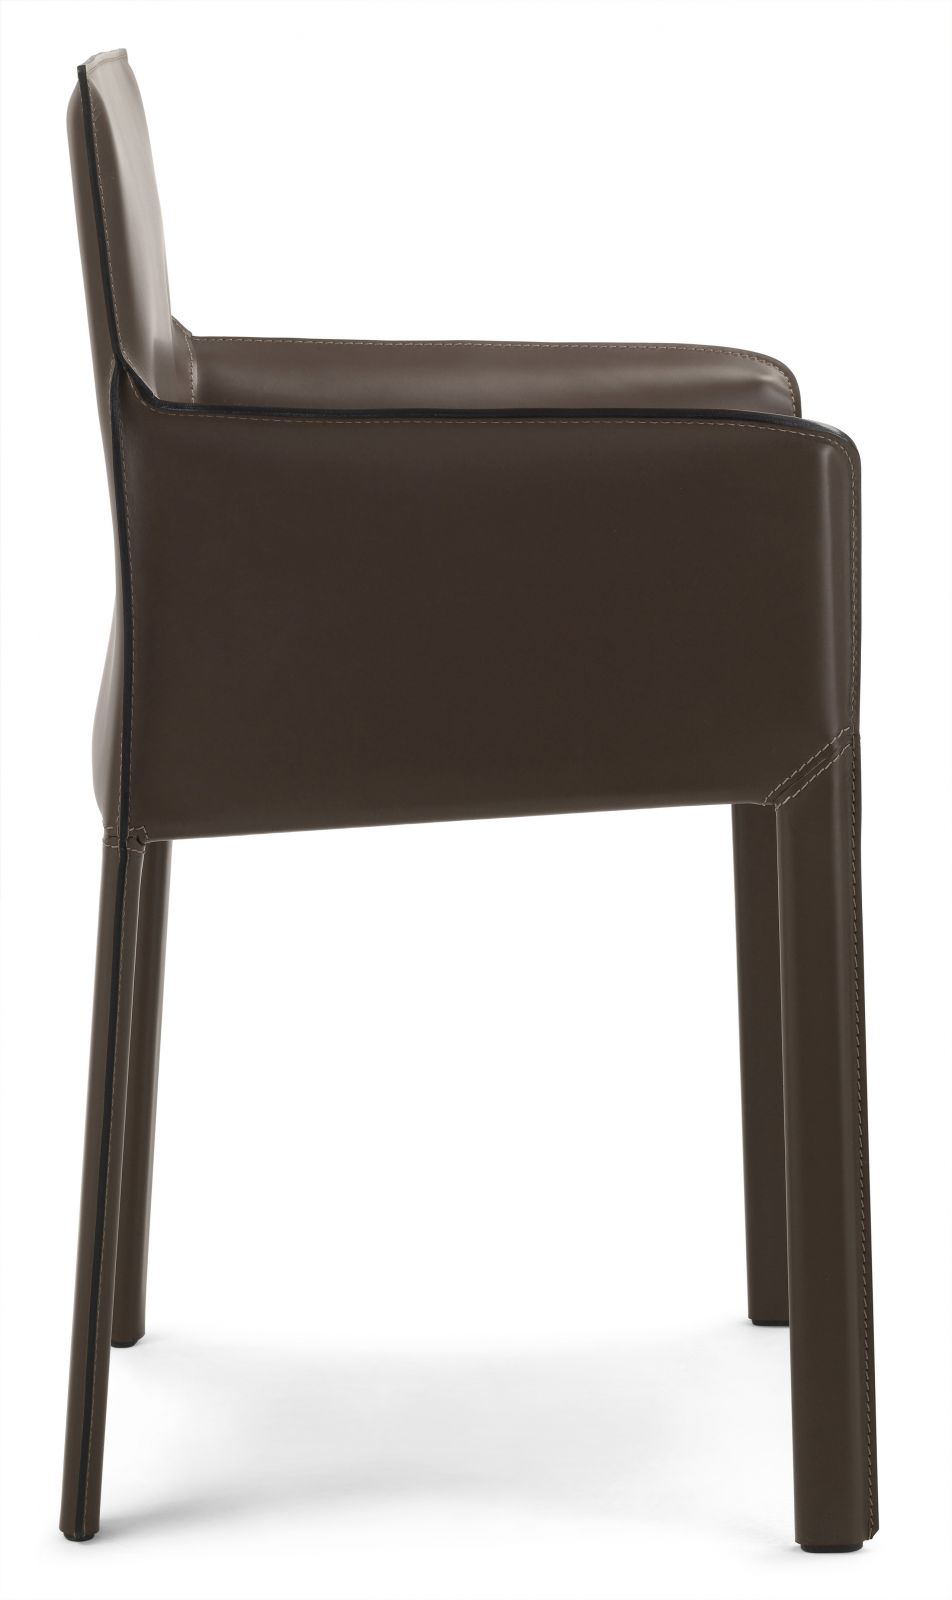 Italian leather dining chairs modern modern Italian dining chair, Italian furniture design, made in Italy for XEBYUFF